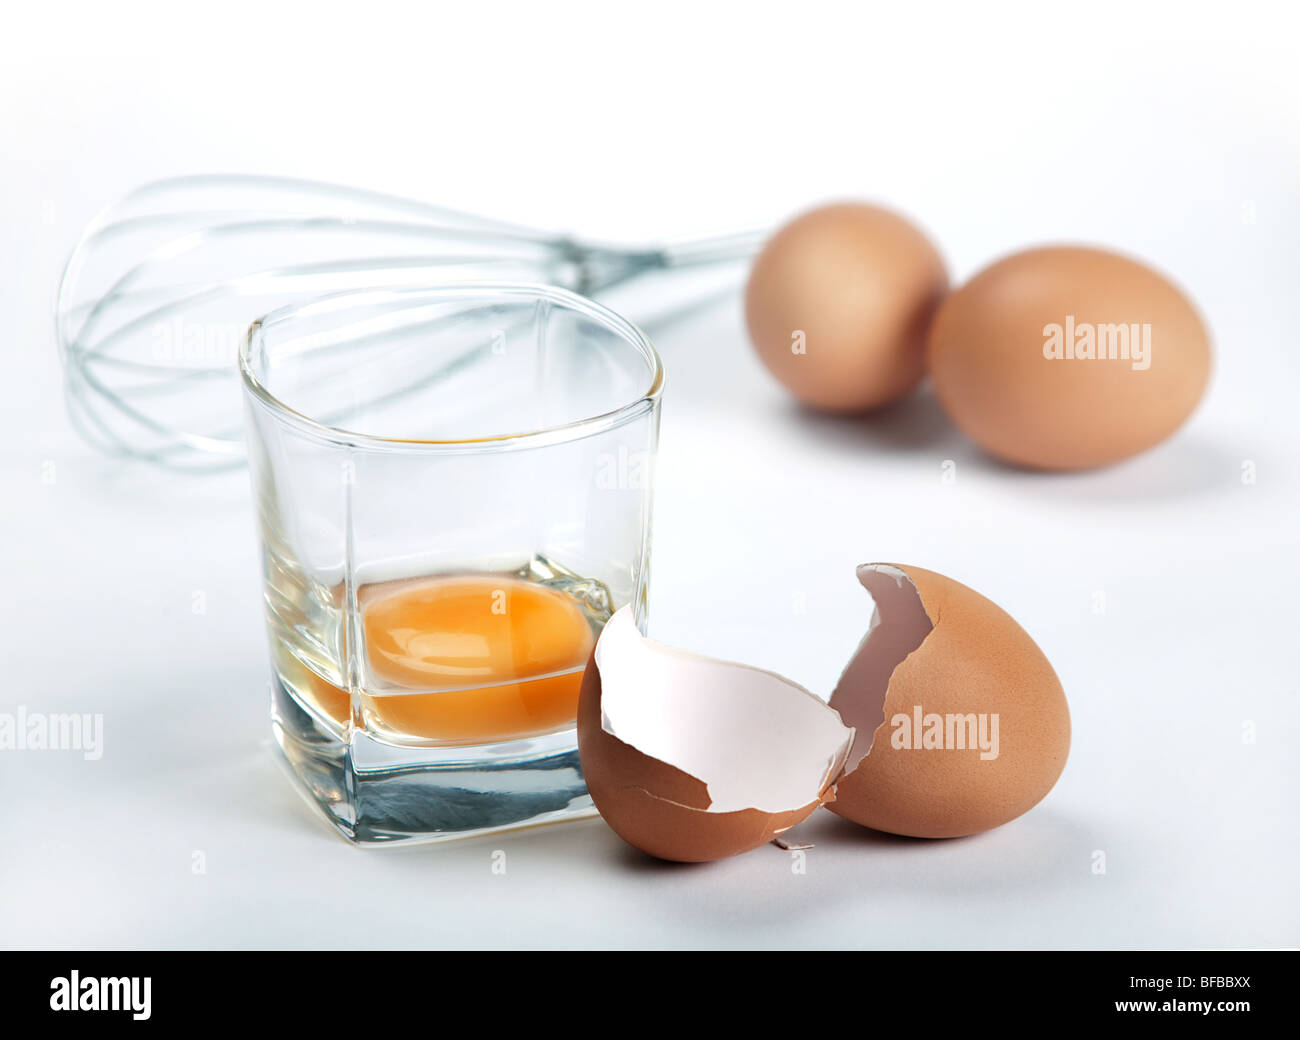 Egg shell and yelk in glass on blue toned background Stock Photo